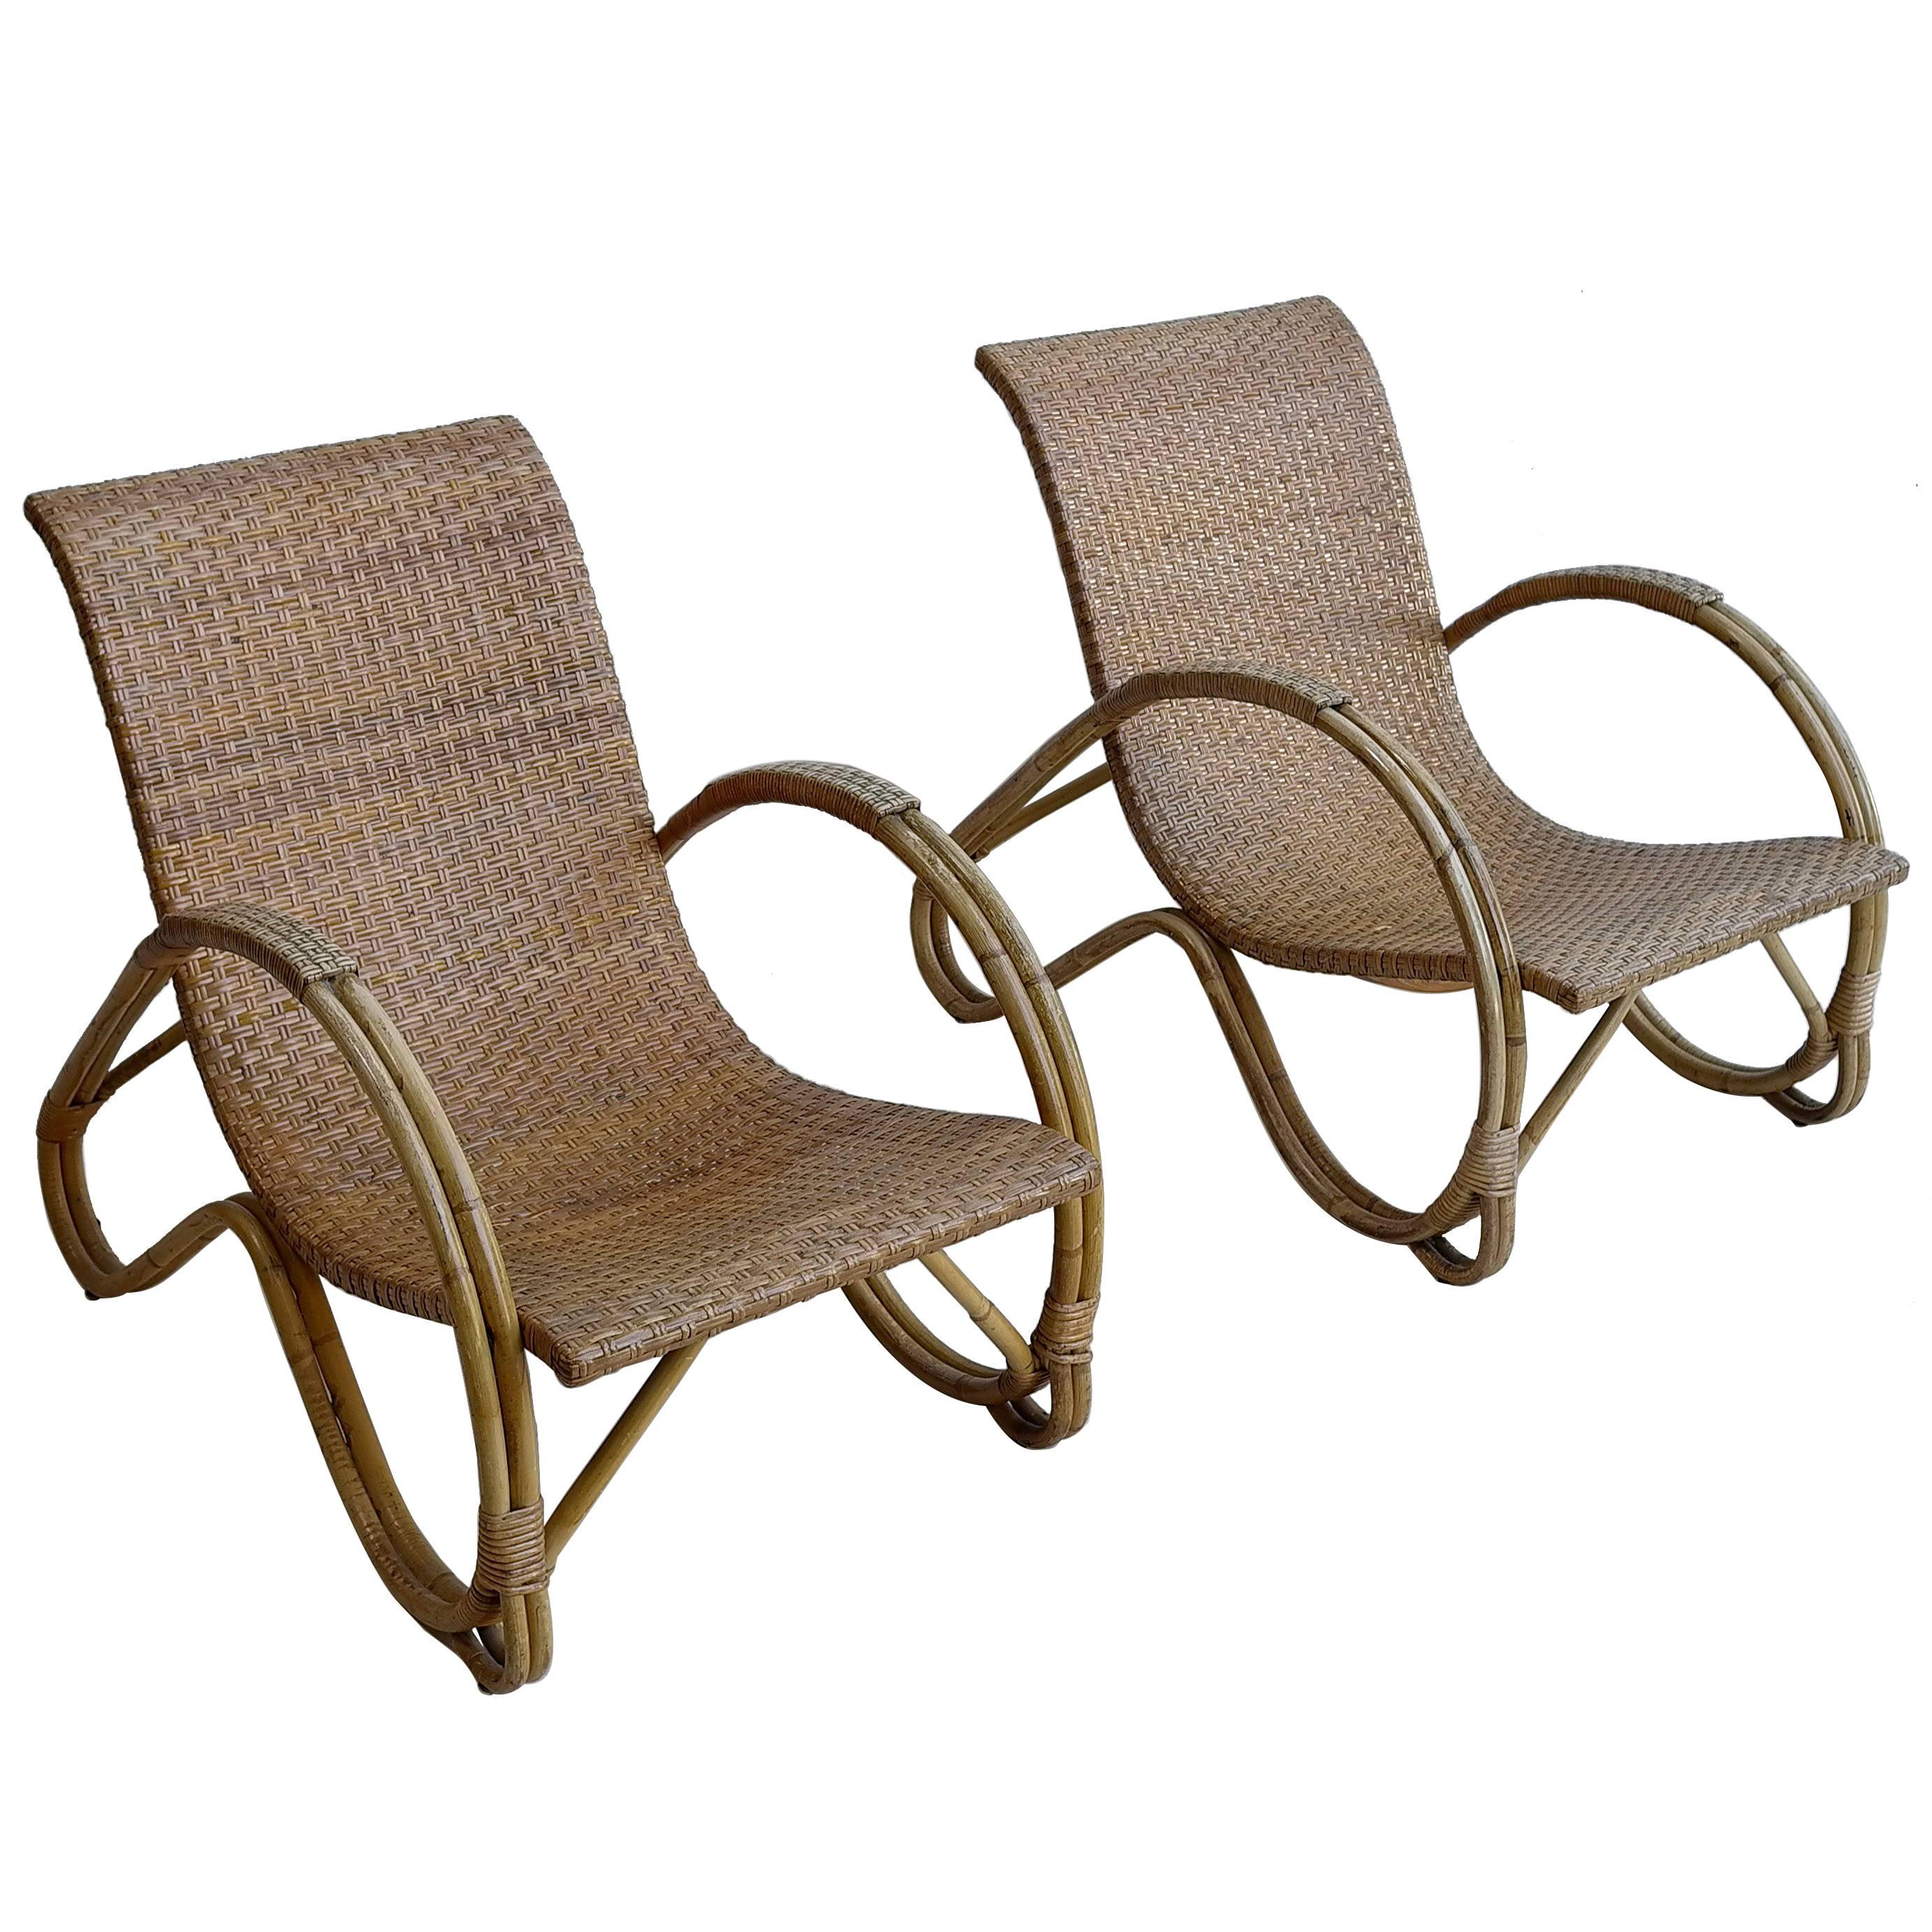 Pair of Mid-Century Monumental Woven Armchairs in Rattan